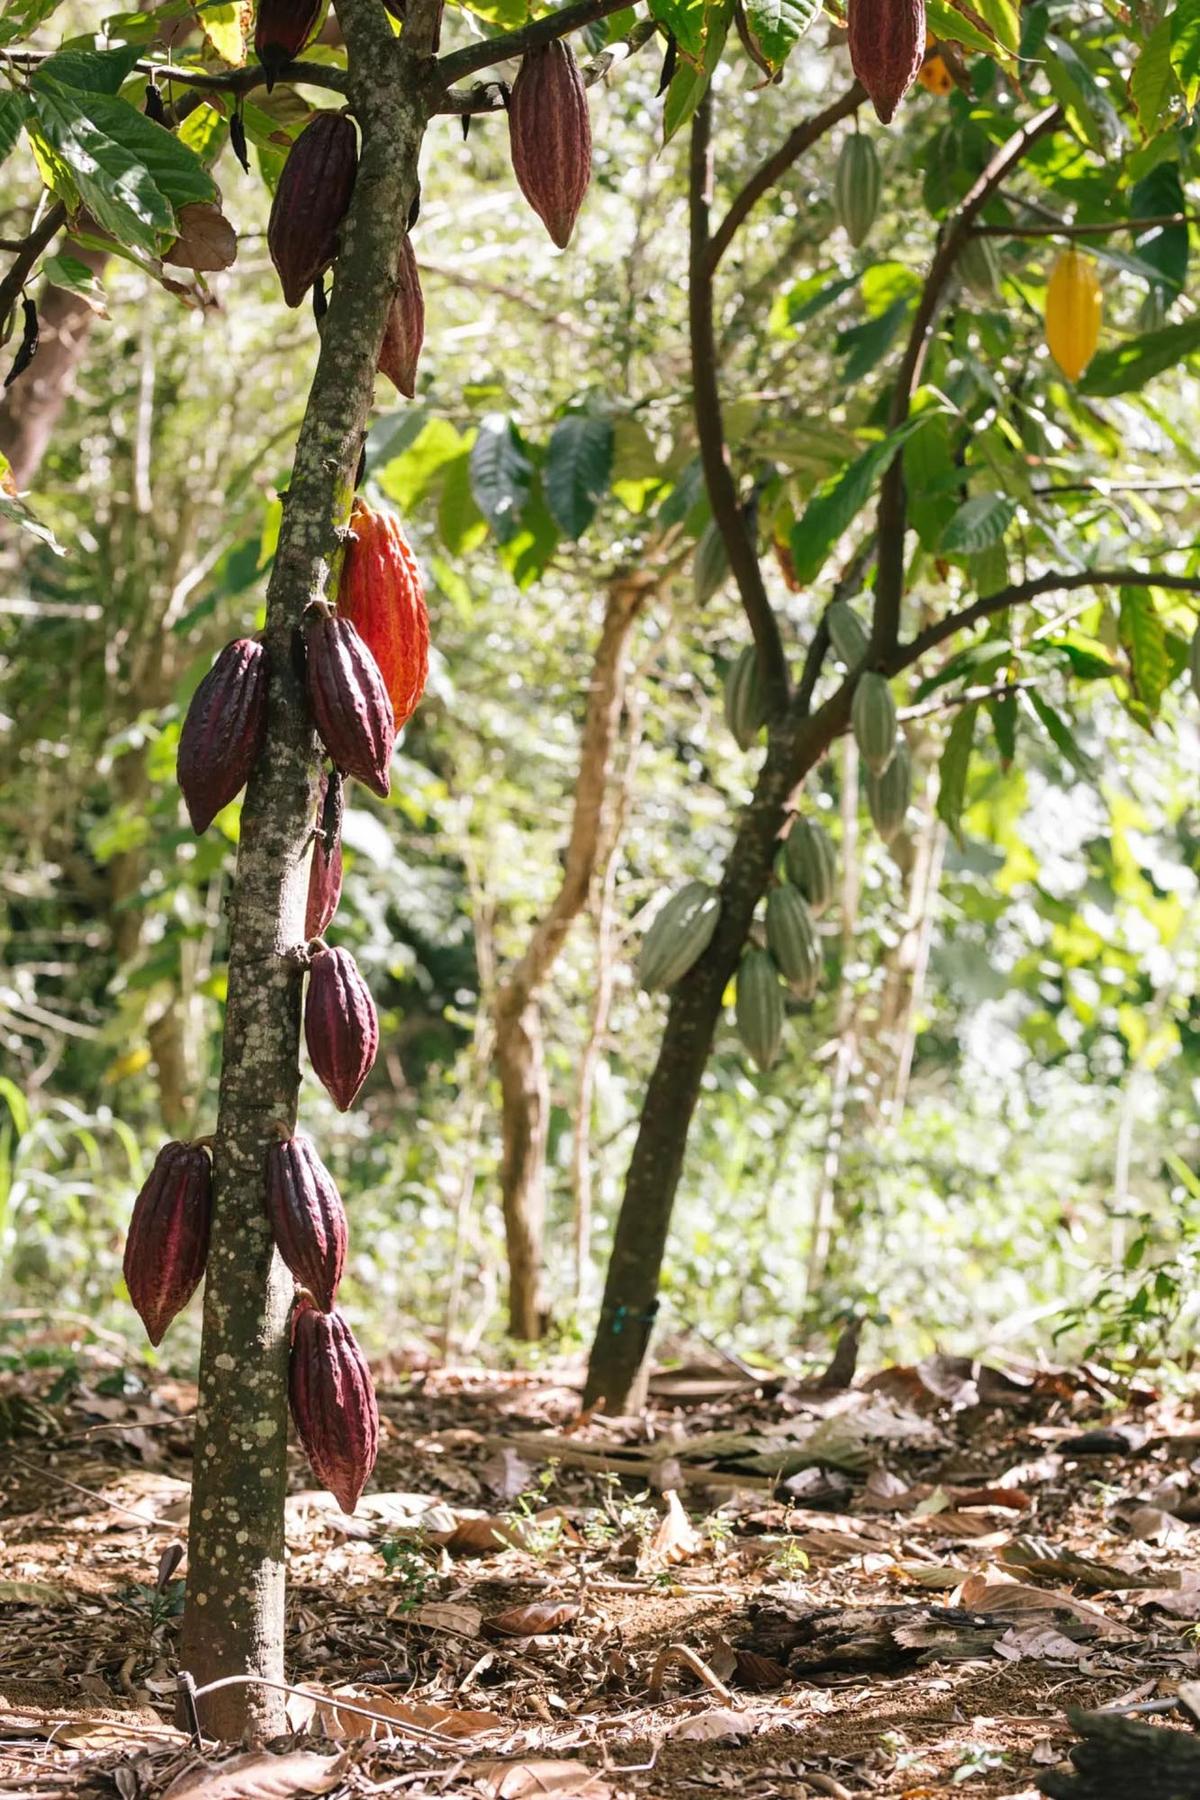 Lydgate Farms, on the eastern side of the island of Kauai, is home to 3,000 cacao trees. (Courtesy of Lydgate Farms/TNS)